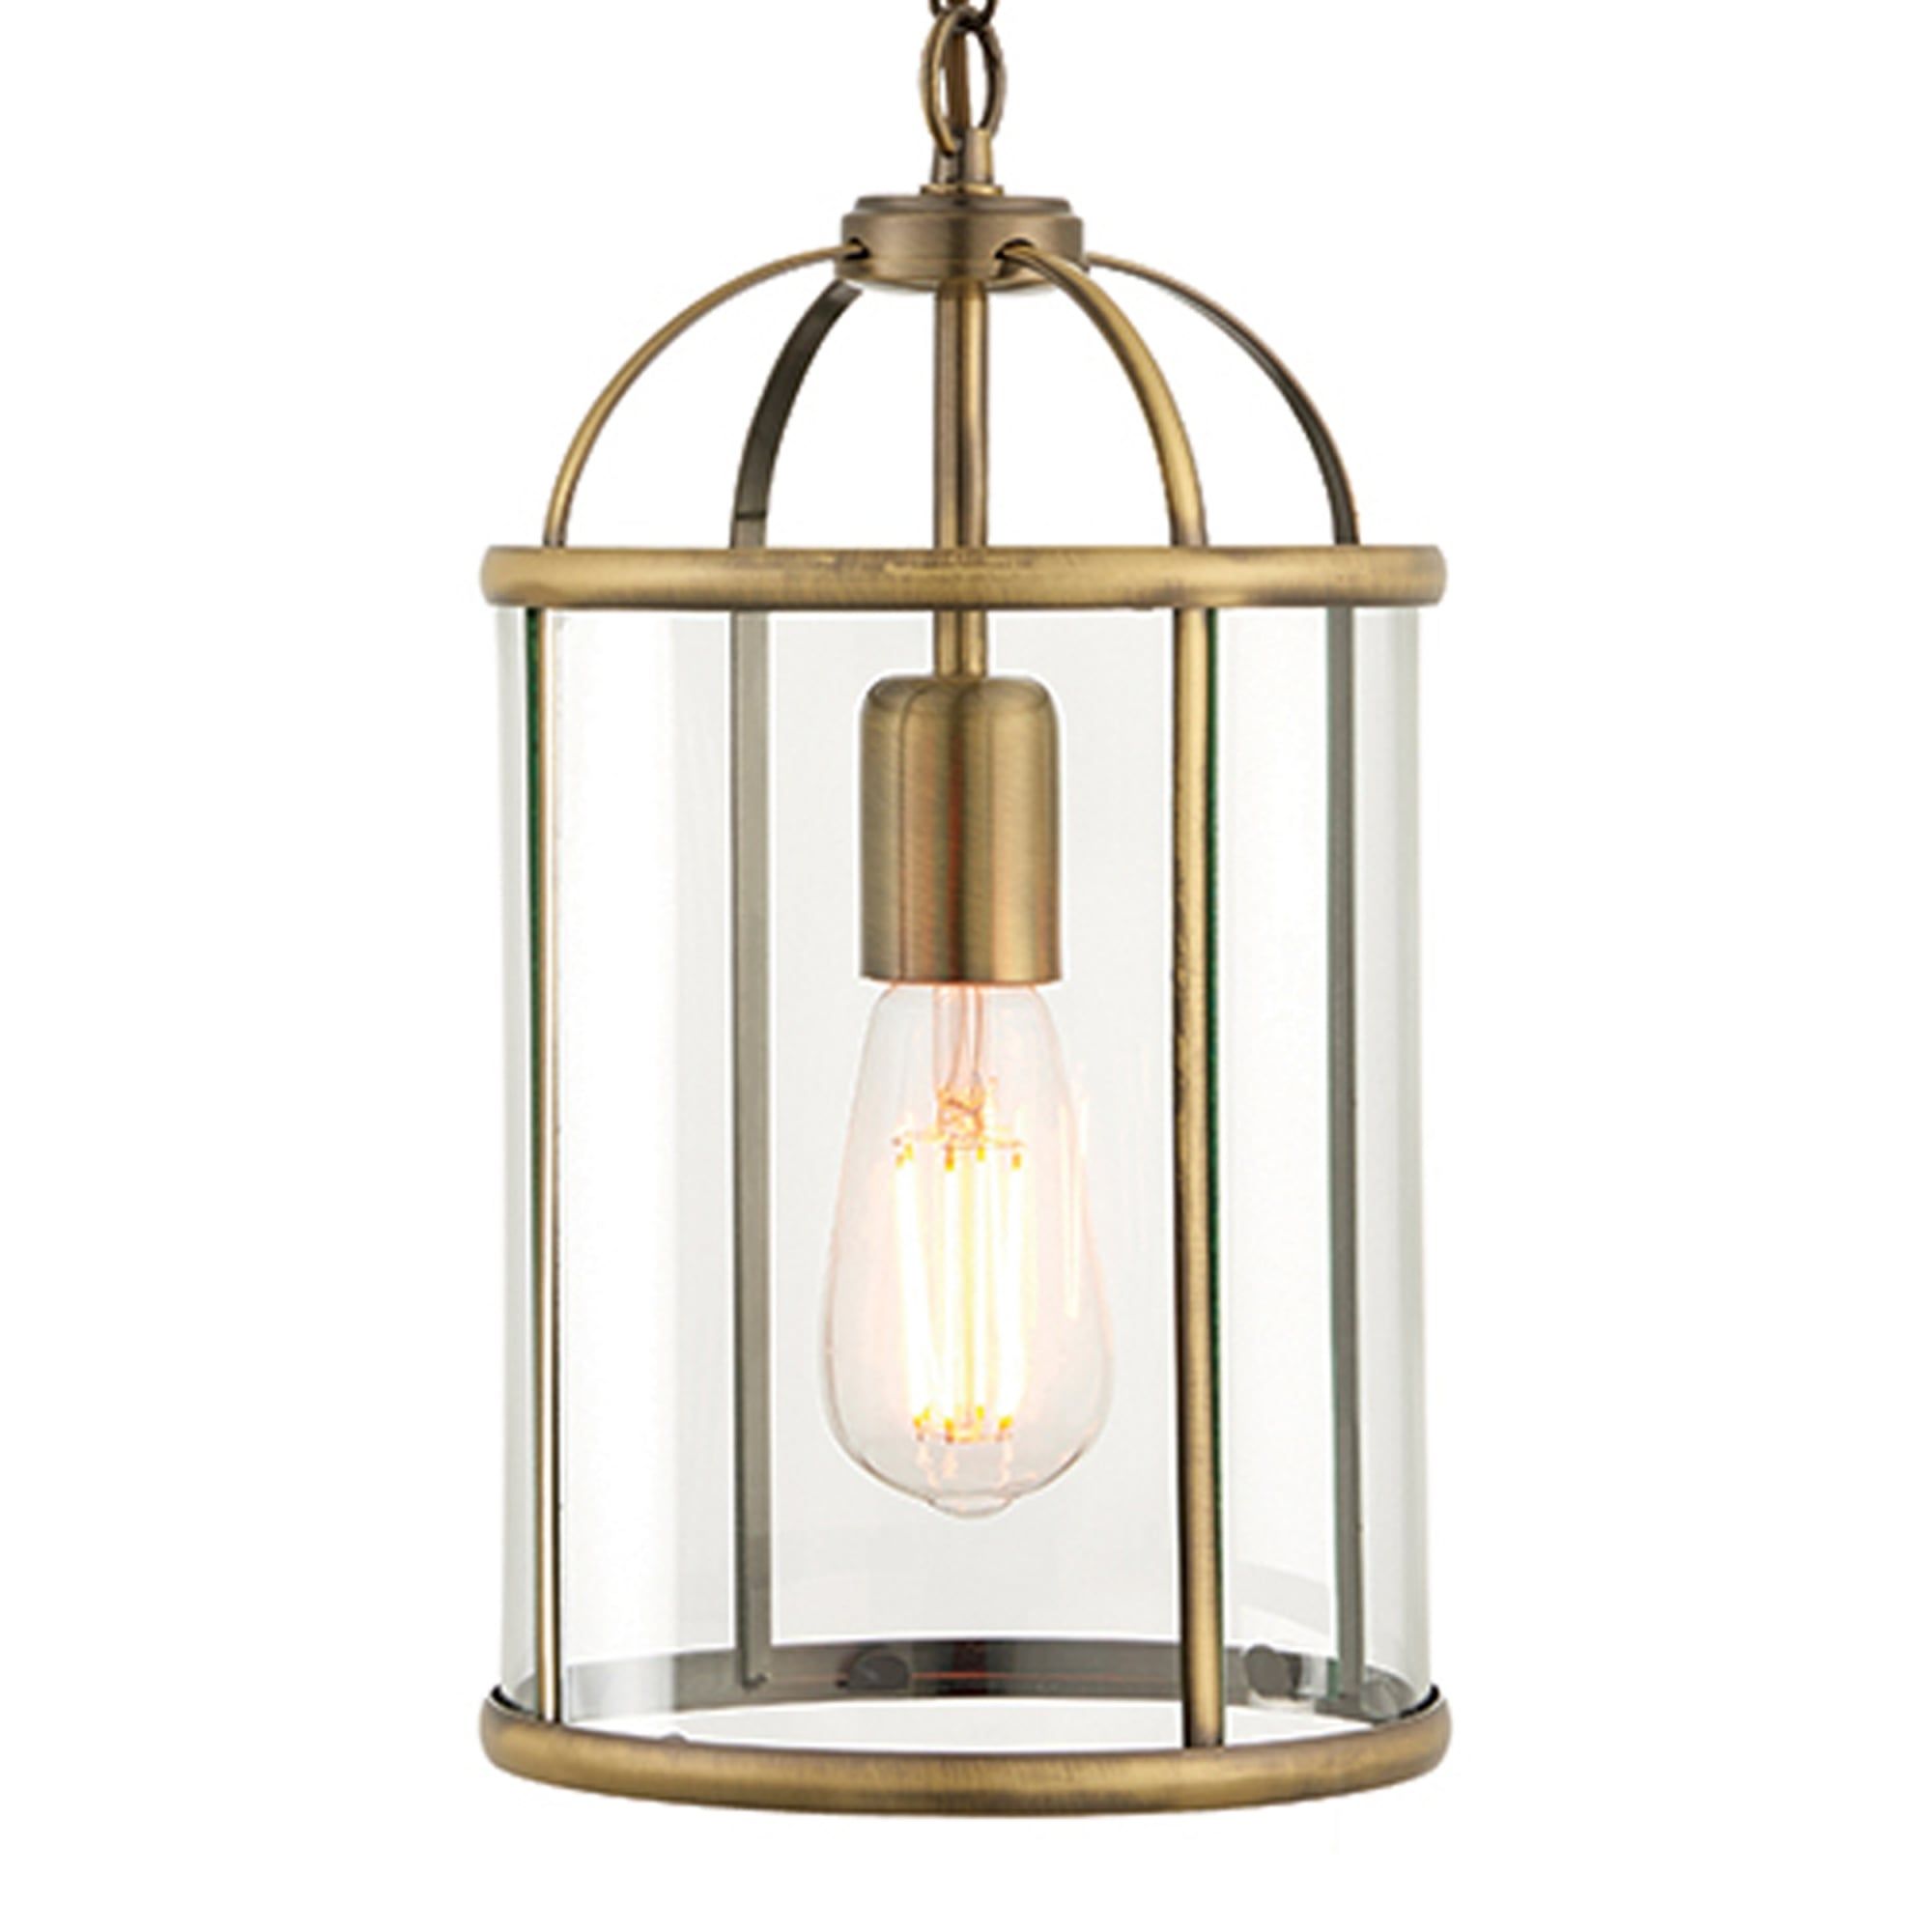 Endon 69454 Lambeth 1 Light Antique Brass And Glass Lantern Pendant Intended For Gild One Light Lantern Chandeliers (View 14 of 15)